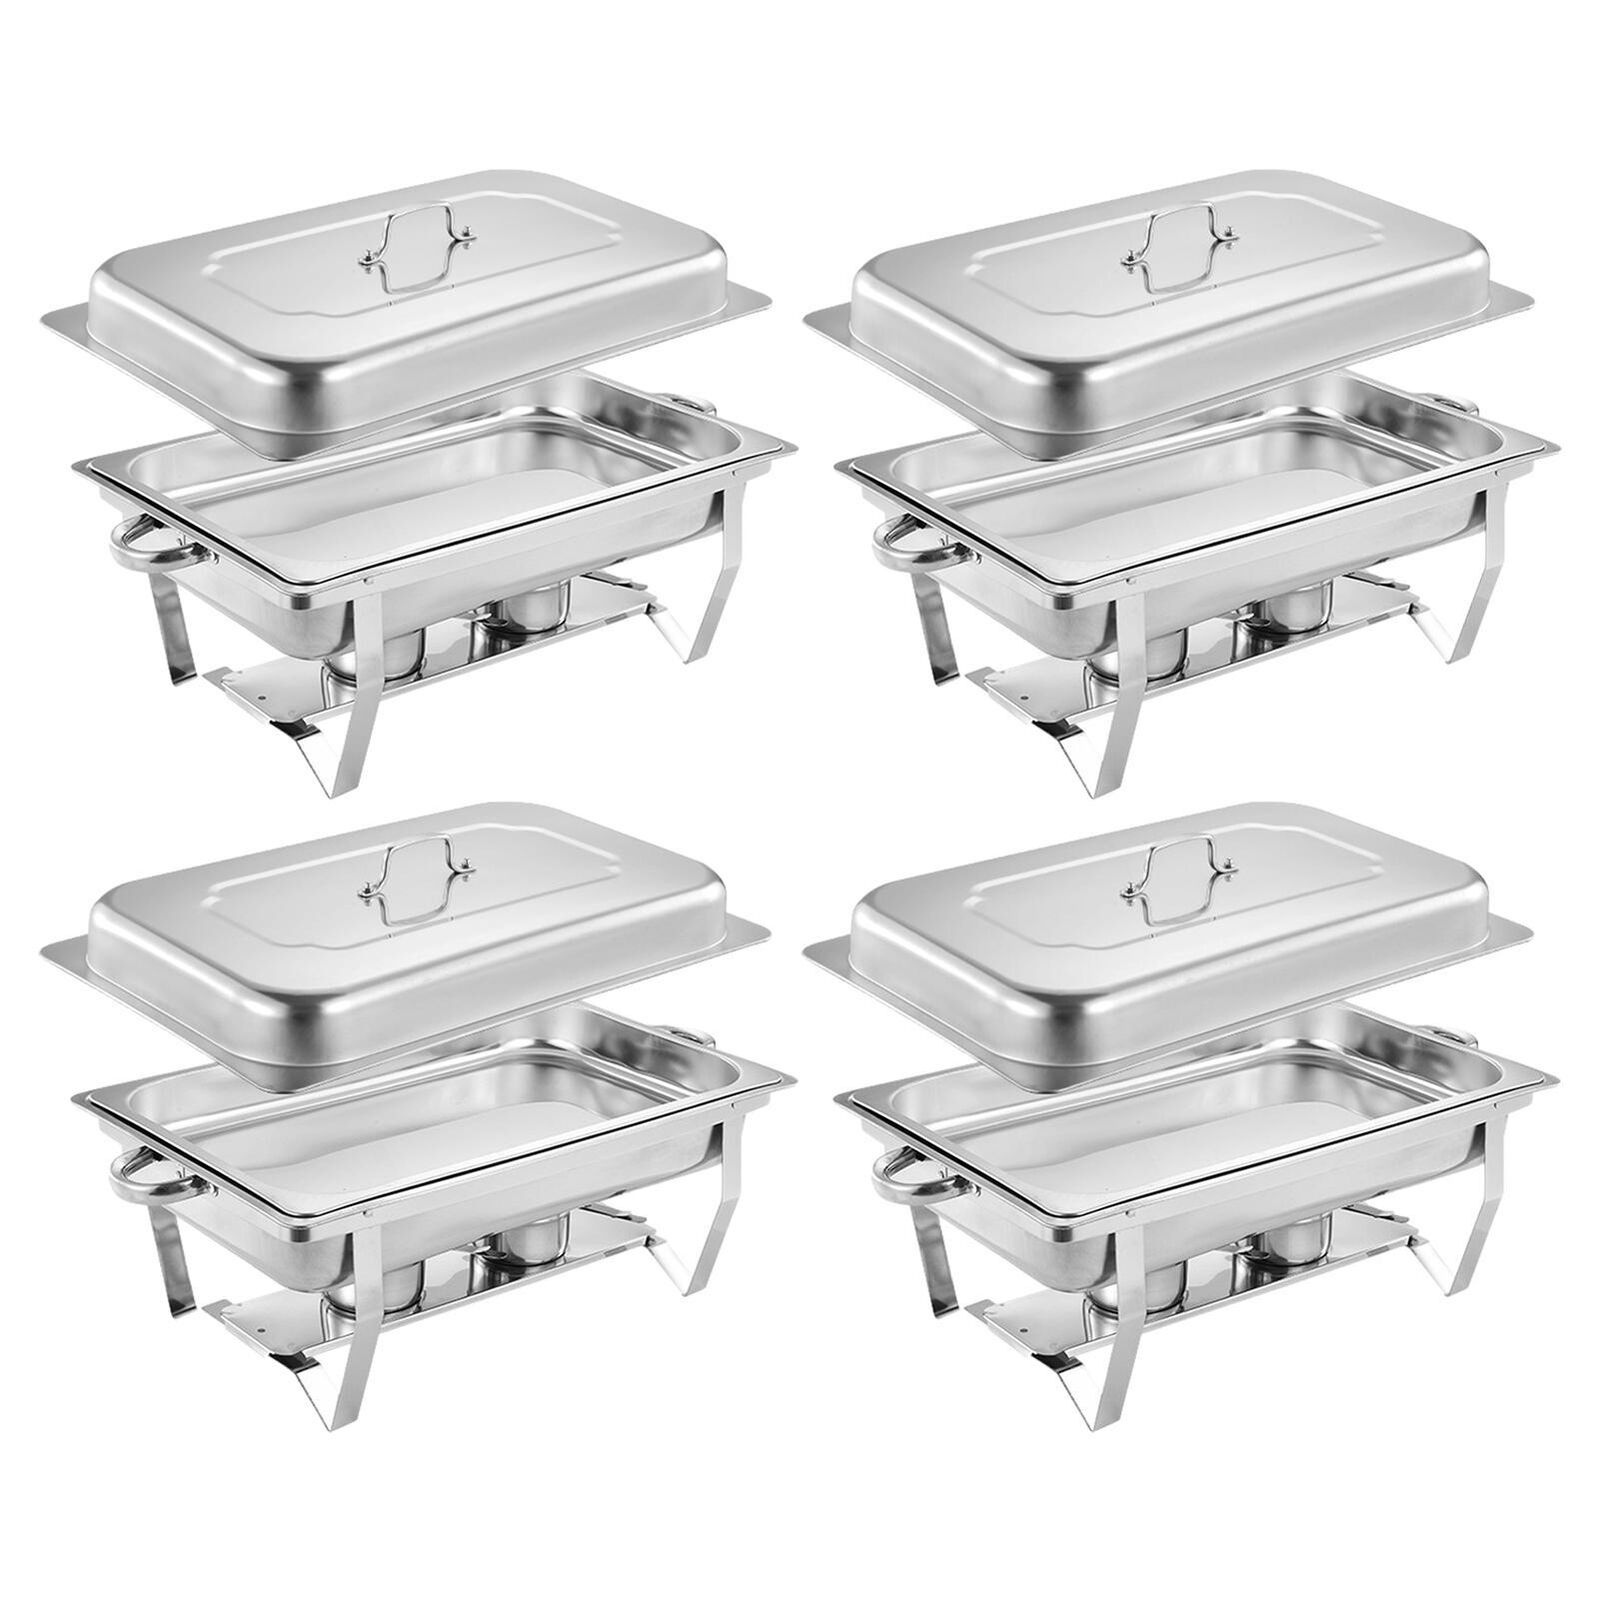 4x Square Stainless Steel Stoves - Single Compartment The Stilt Buffet Stove 